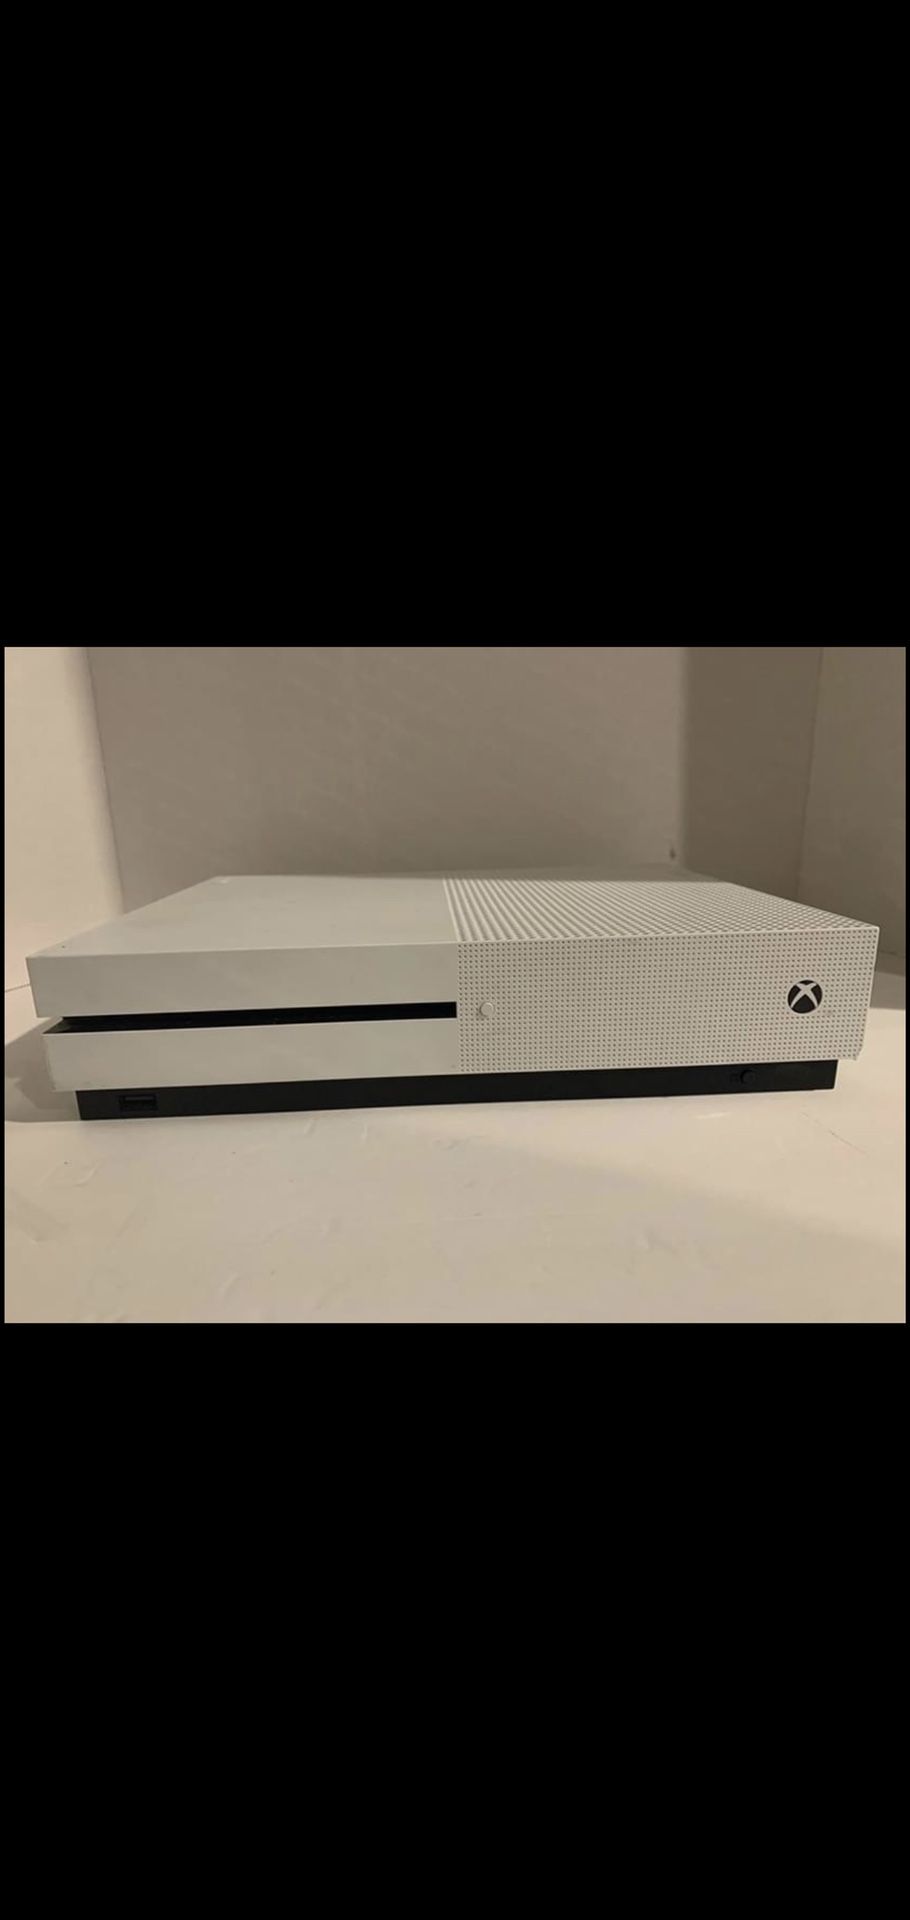 Xbox One S 1Tb/With power cable & controller